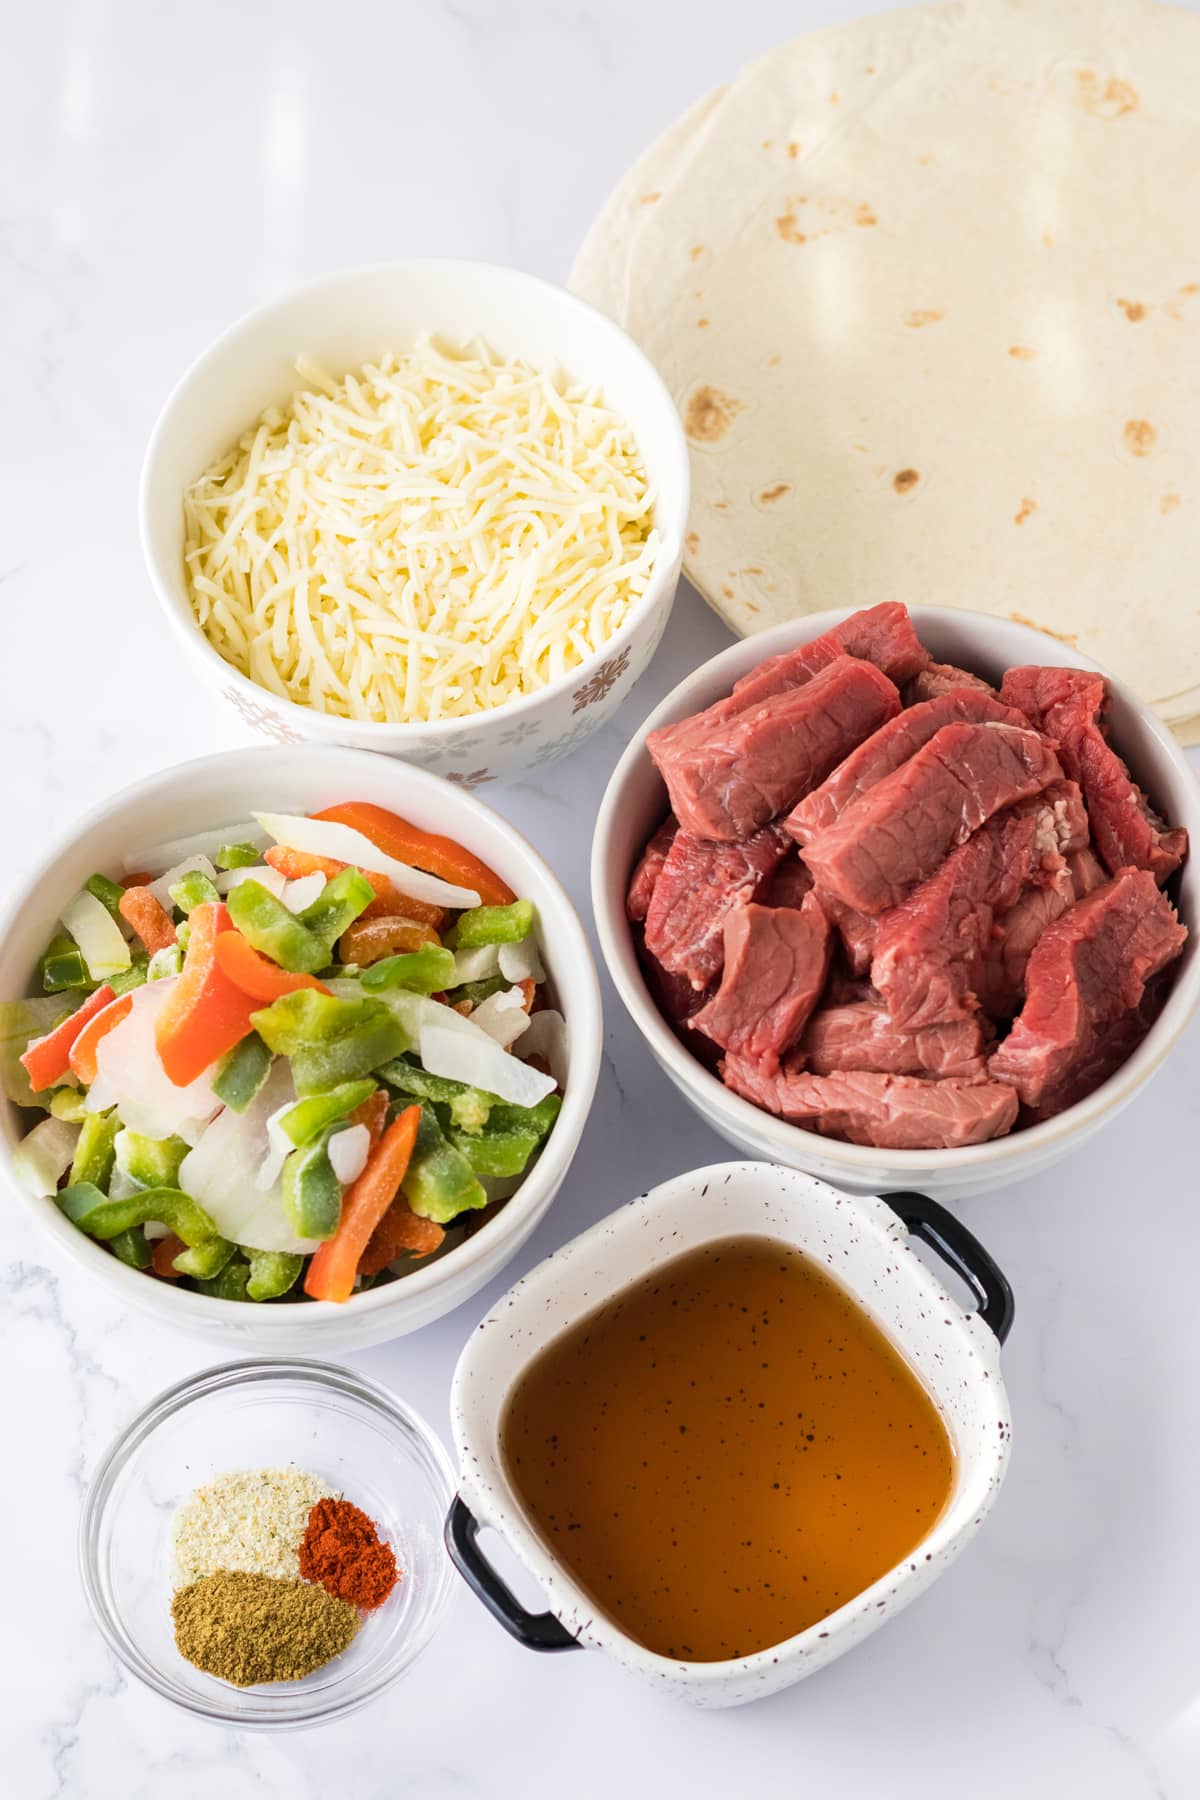 Ingredients of Slow Cooker Cheesesteak Quesadillas are the following: Top sirloin steak, cut into strips, Frozen bell peppers and onions, Beef broth, Garlic powder, Onion powder, Smoked paprika, Burrito sized flour tortillas, Shredded mozzarella provolone cheese, Nonstick cooking spray